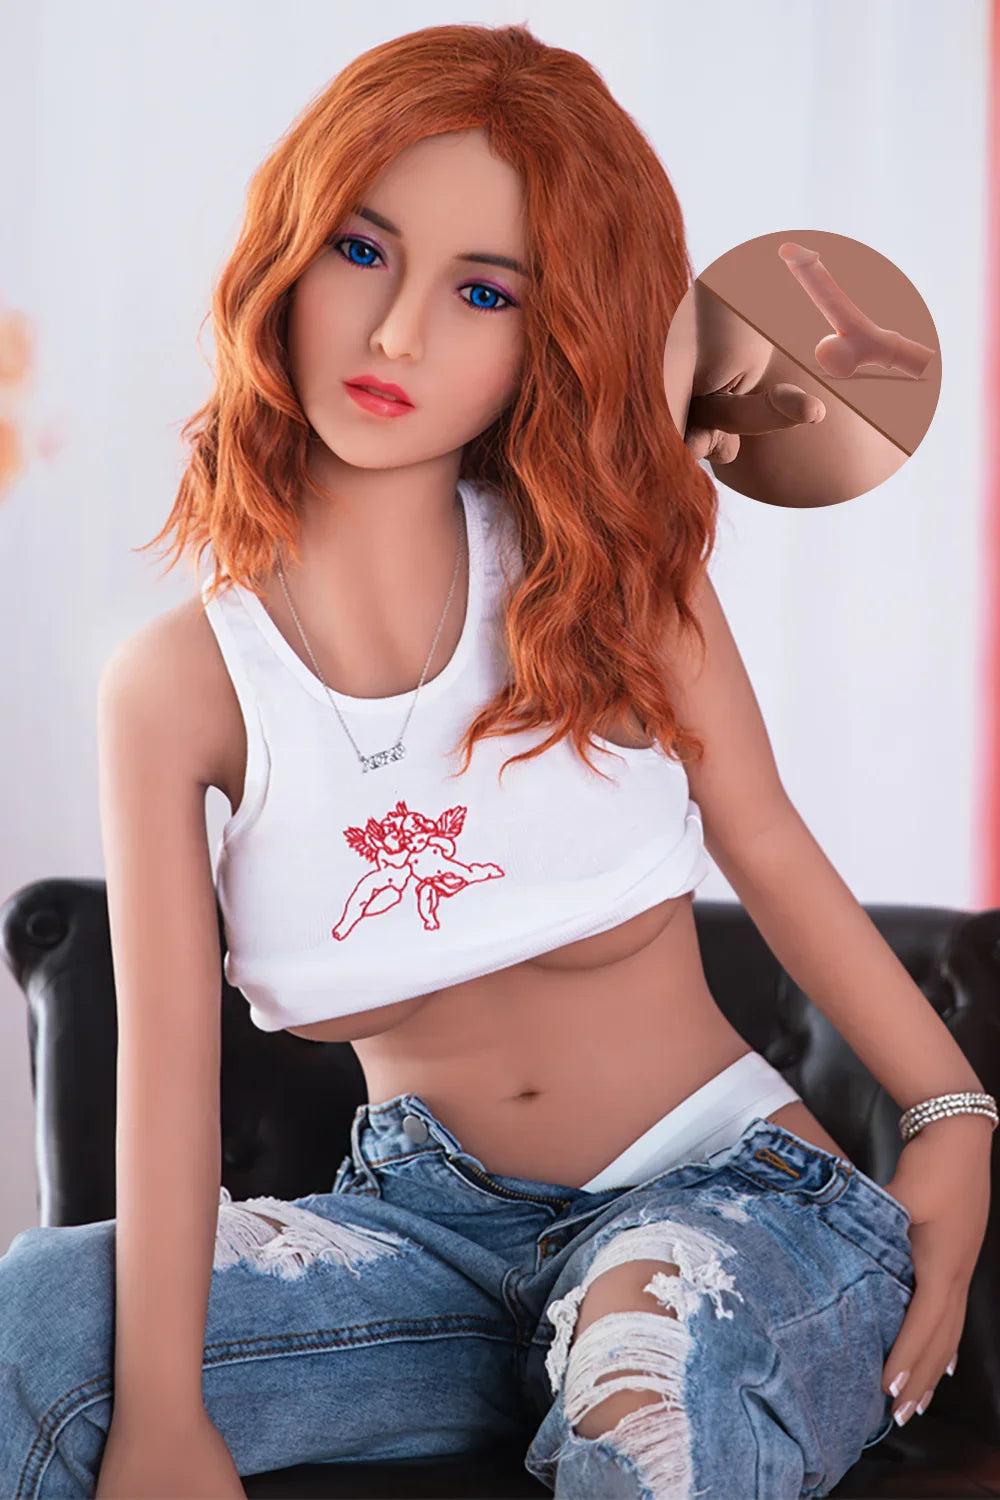 US Stock - Haven 150cm 187# Transgender TPE Sex Doll Tanned Skin Sexy Real Lesbian Doll Adult Shemale Love Doll